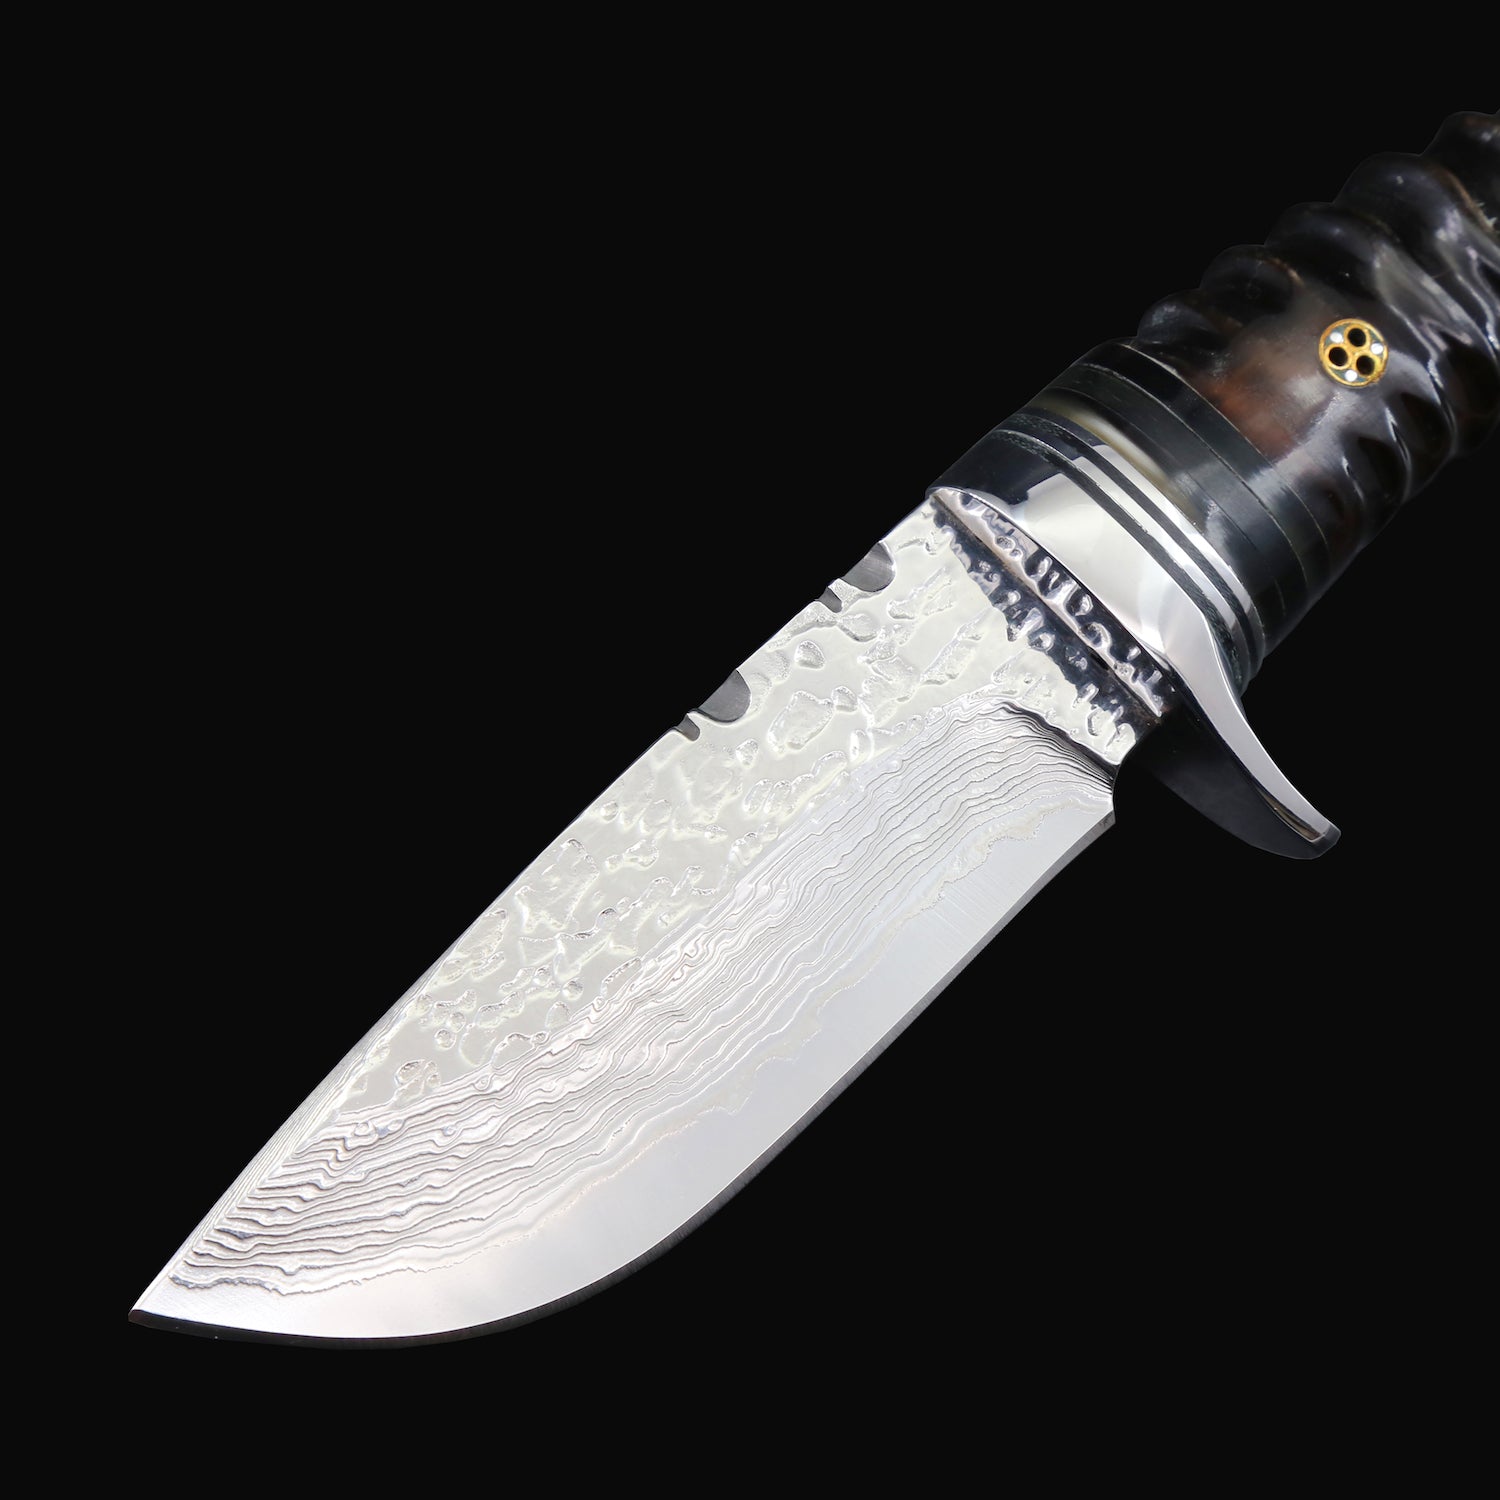 The Black Goat Damascus Steel Fixed Blade